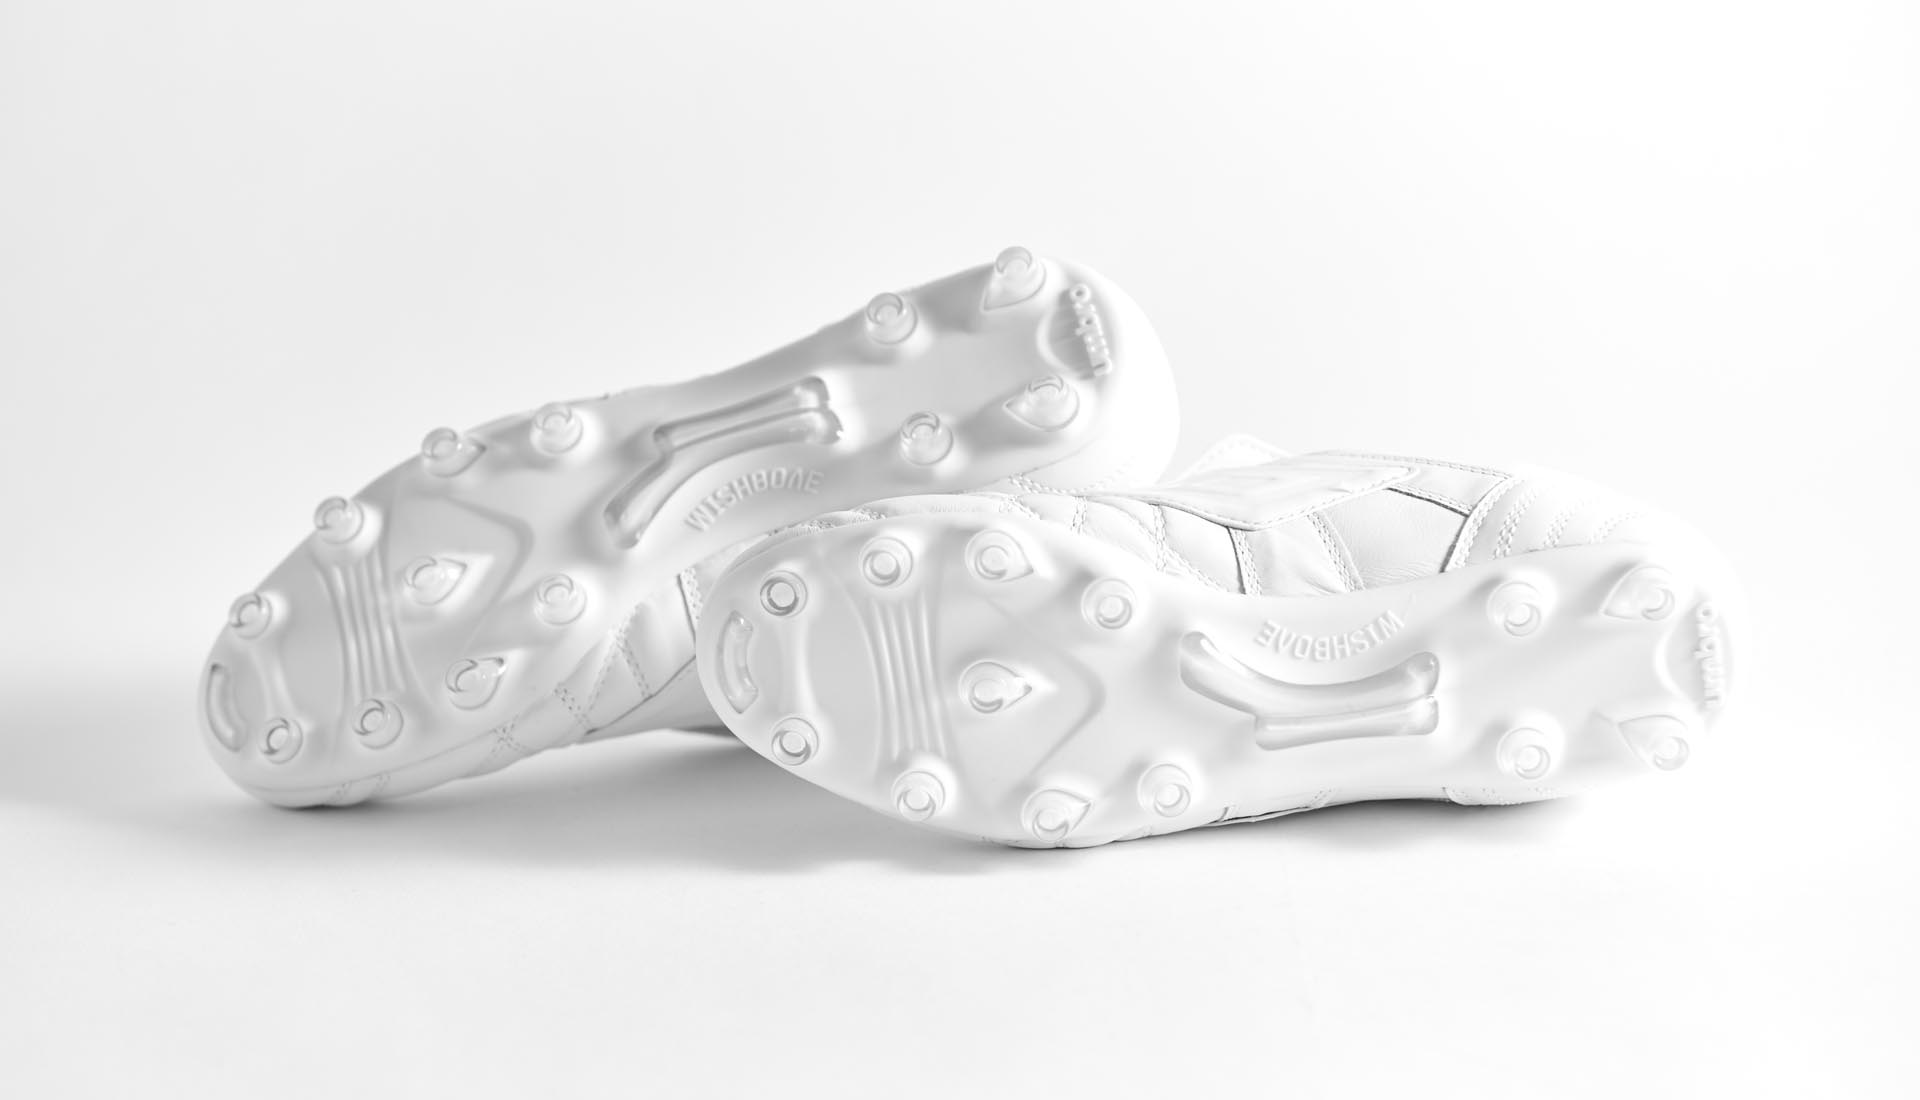 Umbro Speciali Eternal Whiteout Football Boots - SoccerBible